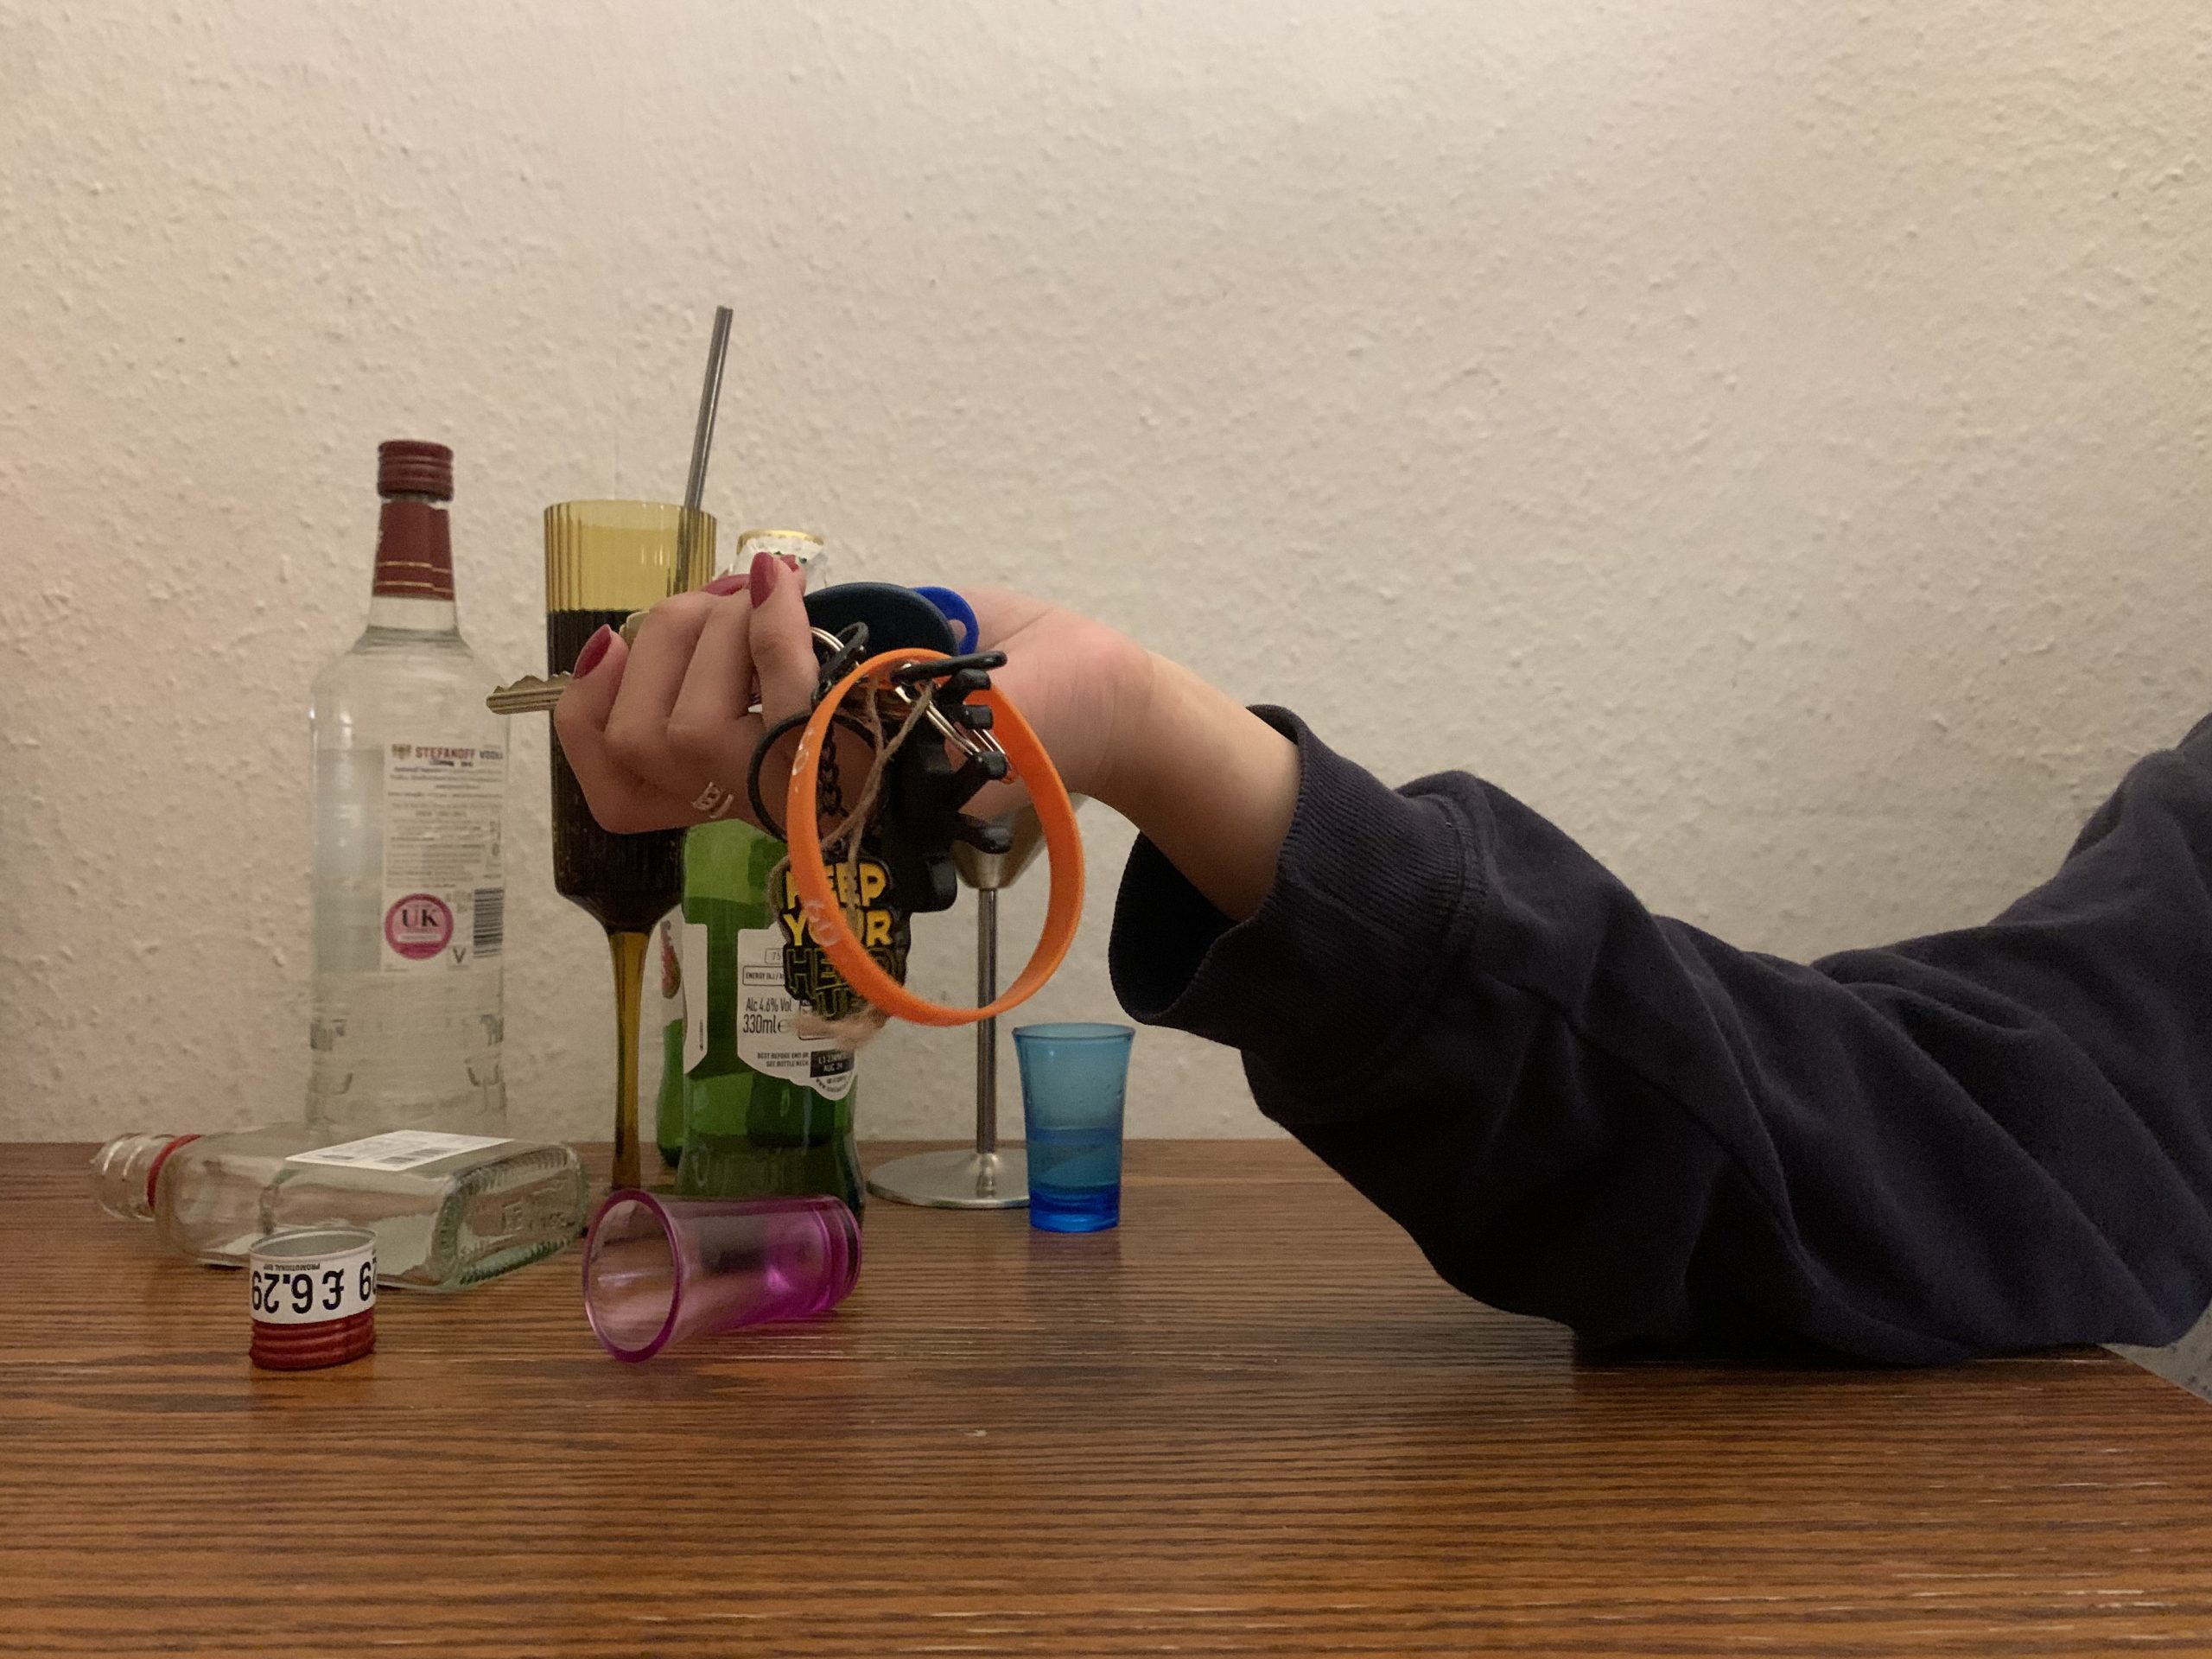 A girl holding keys surrounded by alcohol bottles